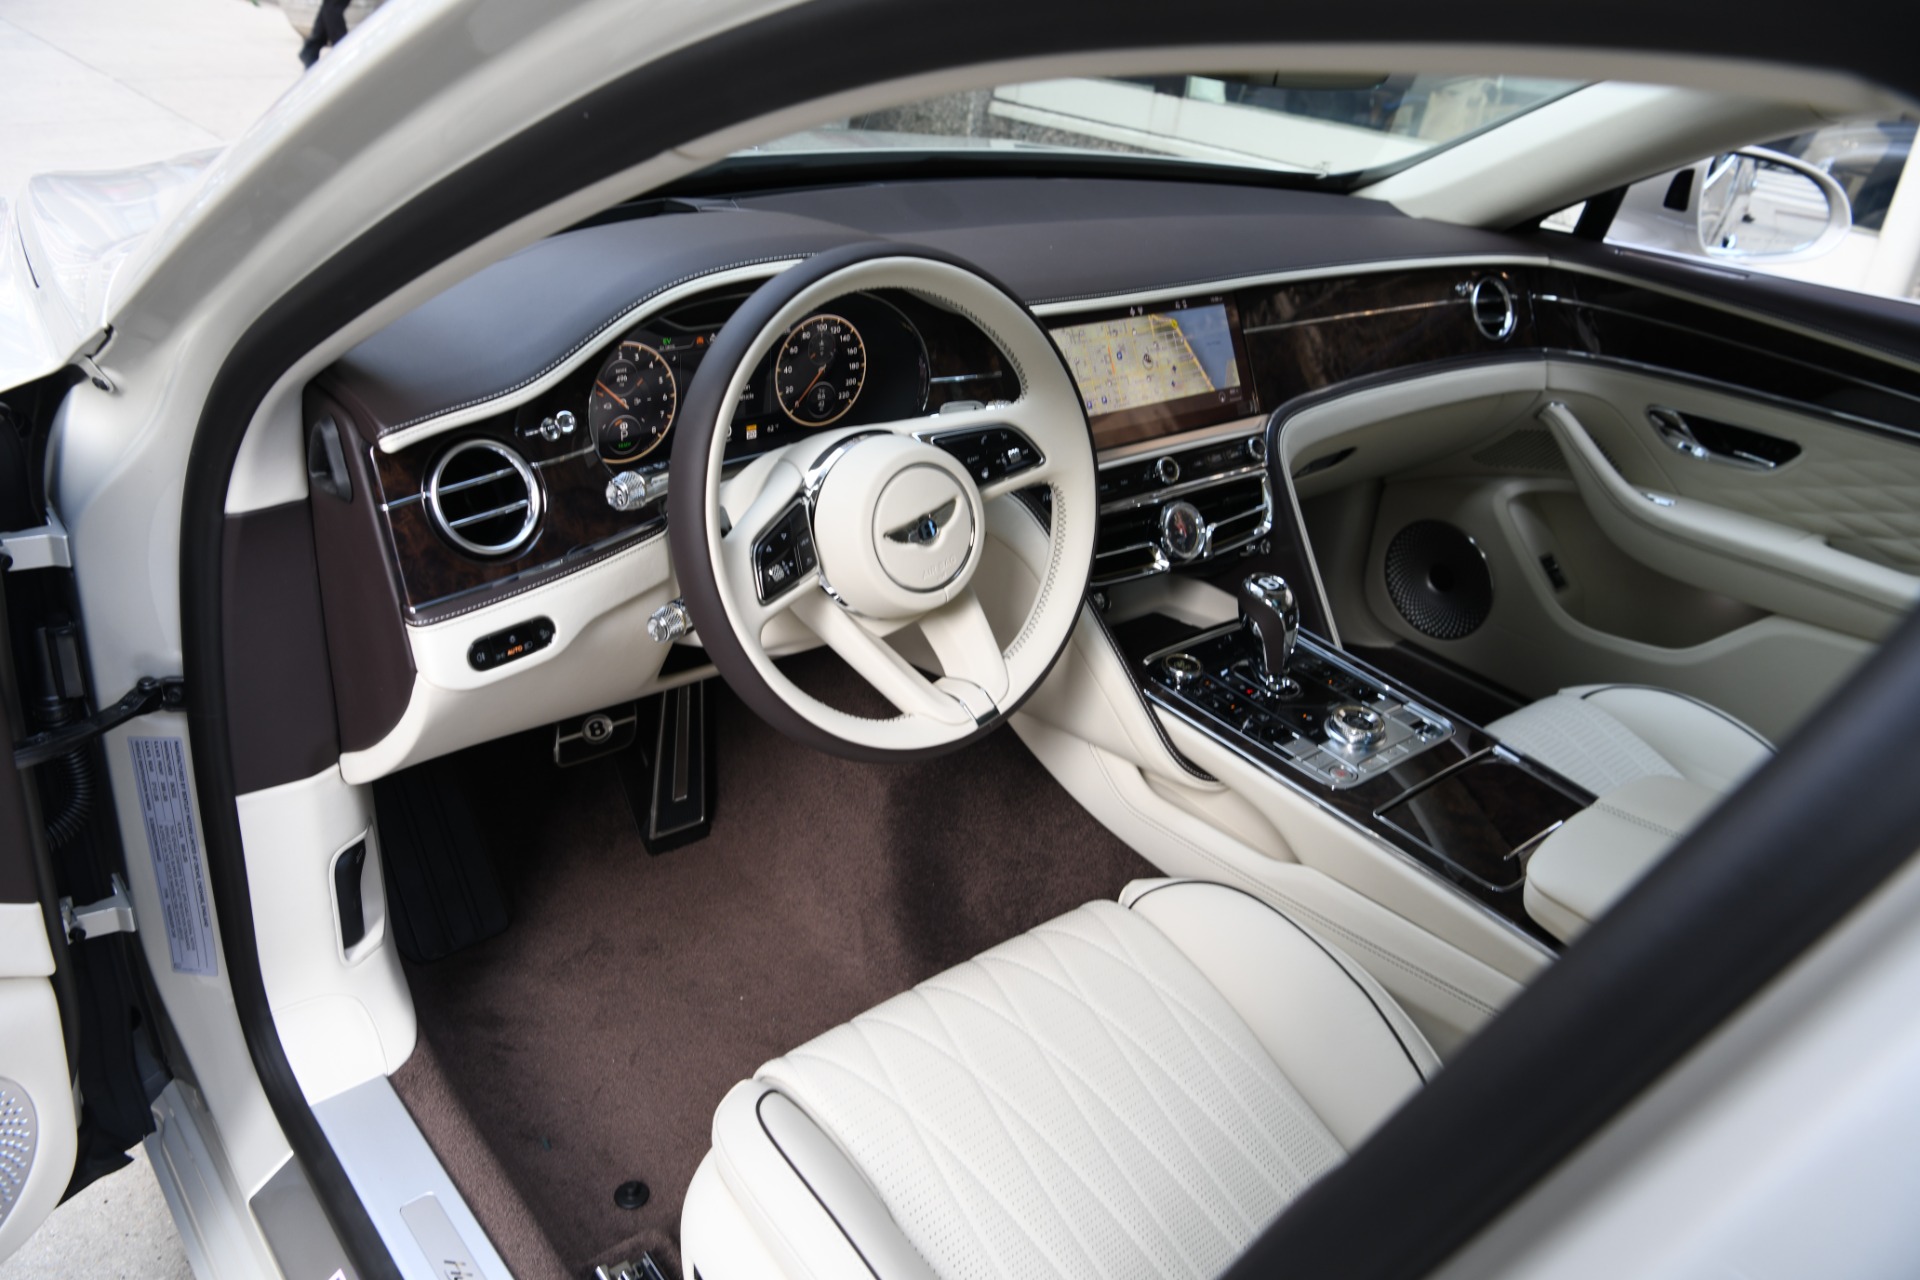 New 2022 Bentley Flying Spur Hybrid | Chicago, IL